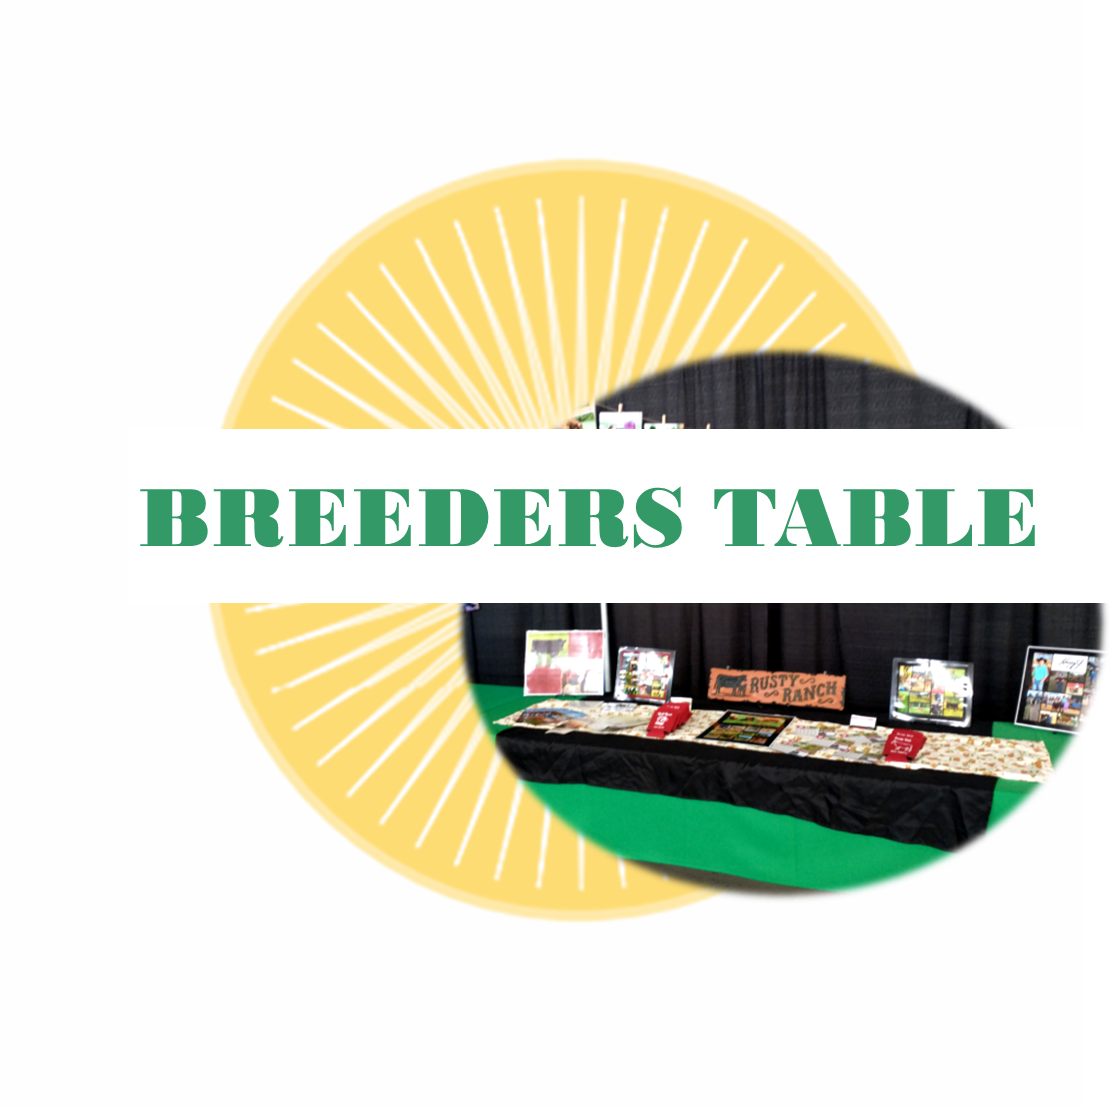 Breeders Exhibit Table (Please scroll down for more details)